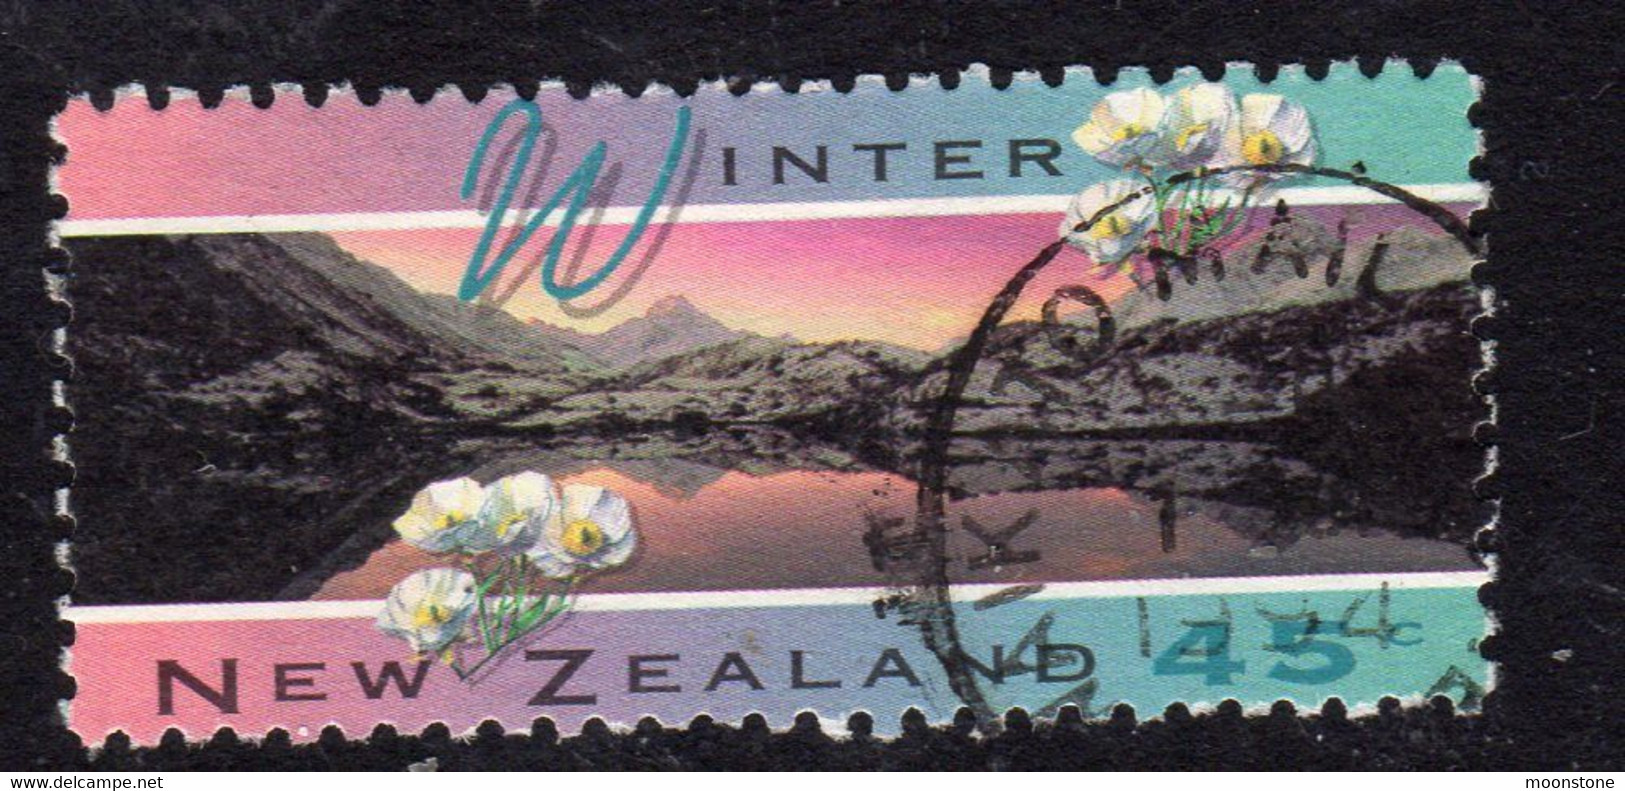 New Zealand 1994 The Four Seasons 45c Value, Used, SG 1793 - Gebraucht